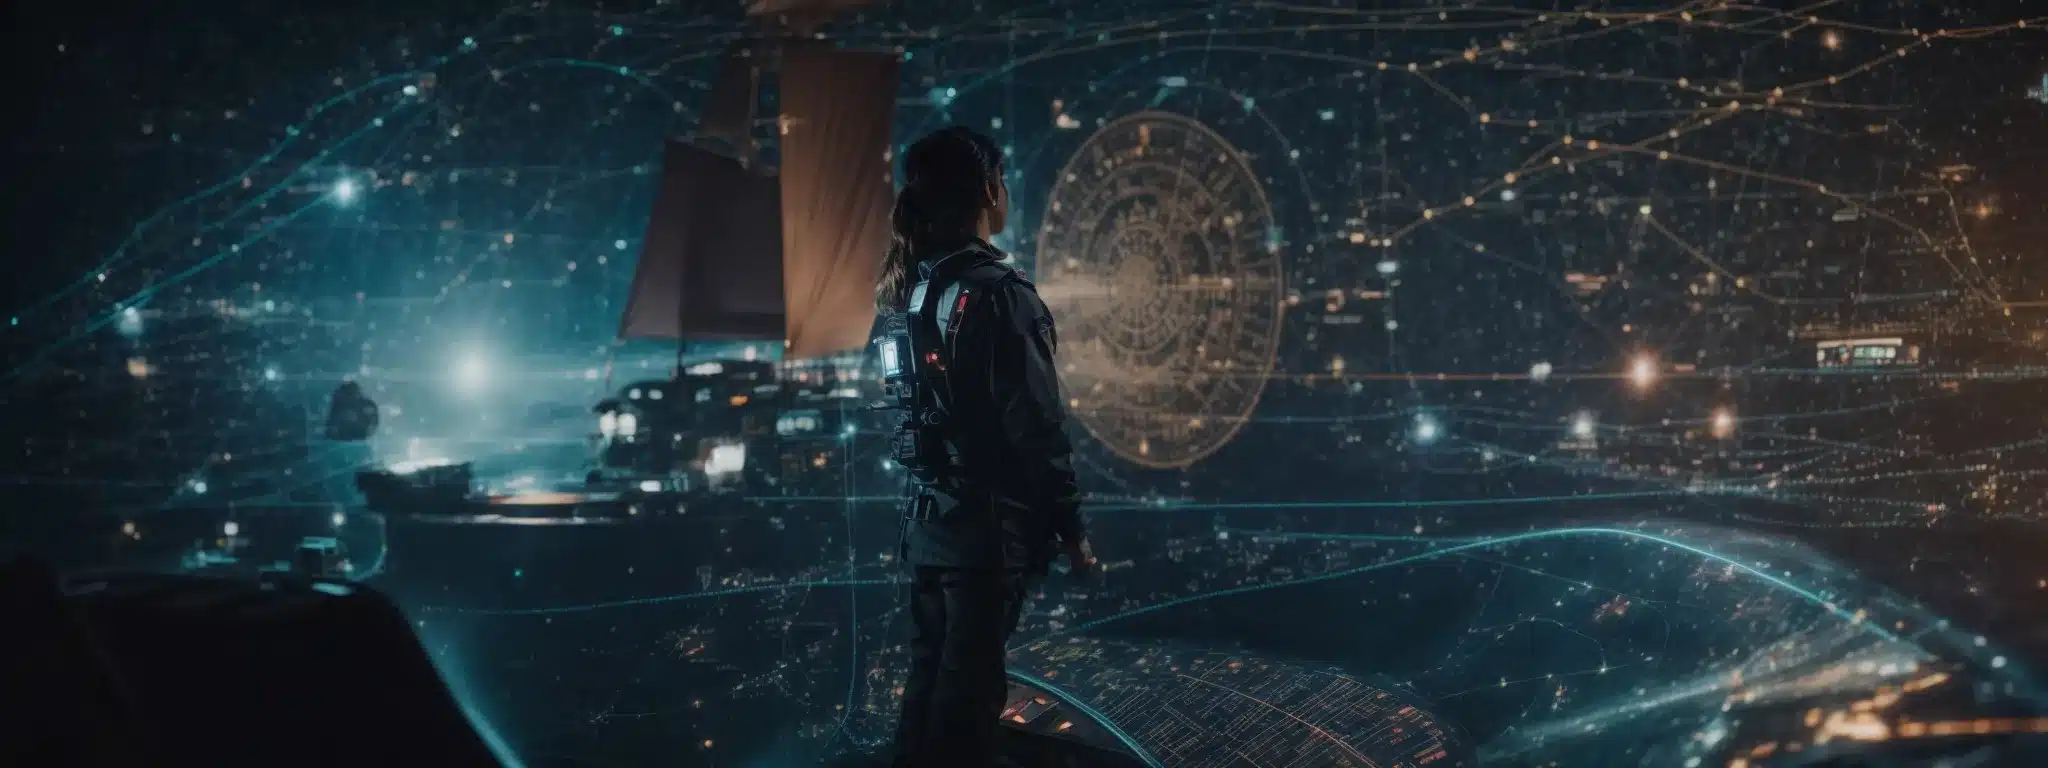 A Captain Confidently Navigating A Ship Through Digital Waves, Symbols Of Metrics And Analytics Glowing On An Ancient Map Under A Constellation Of Social Icons.